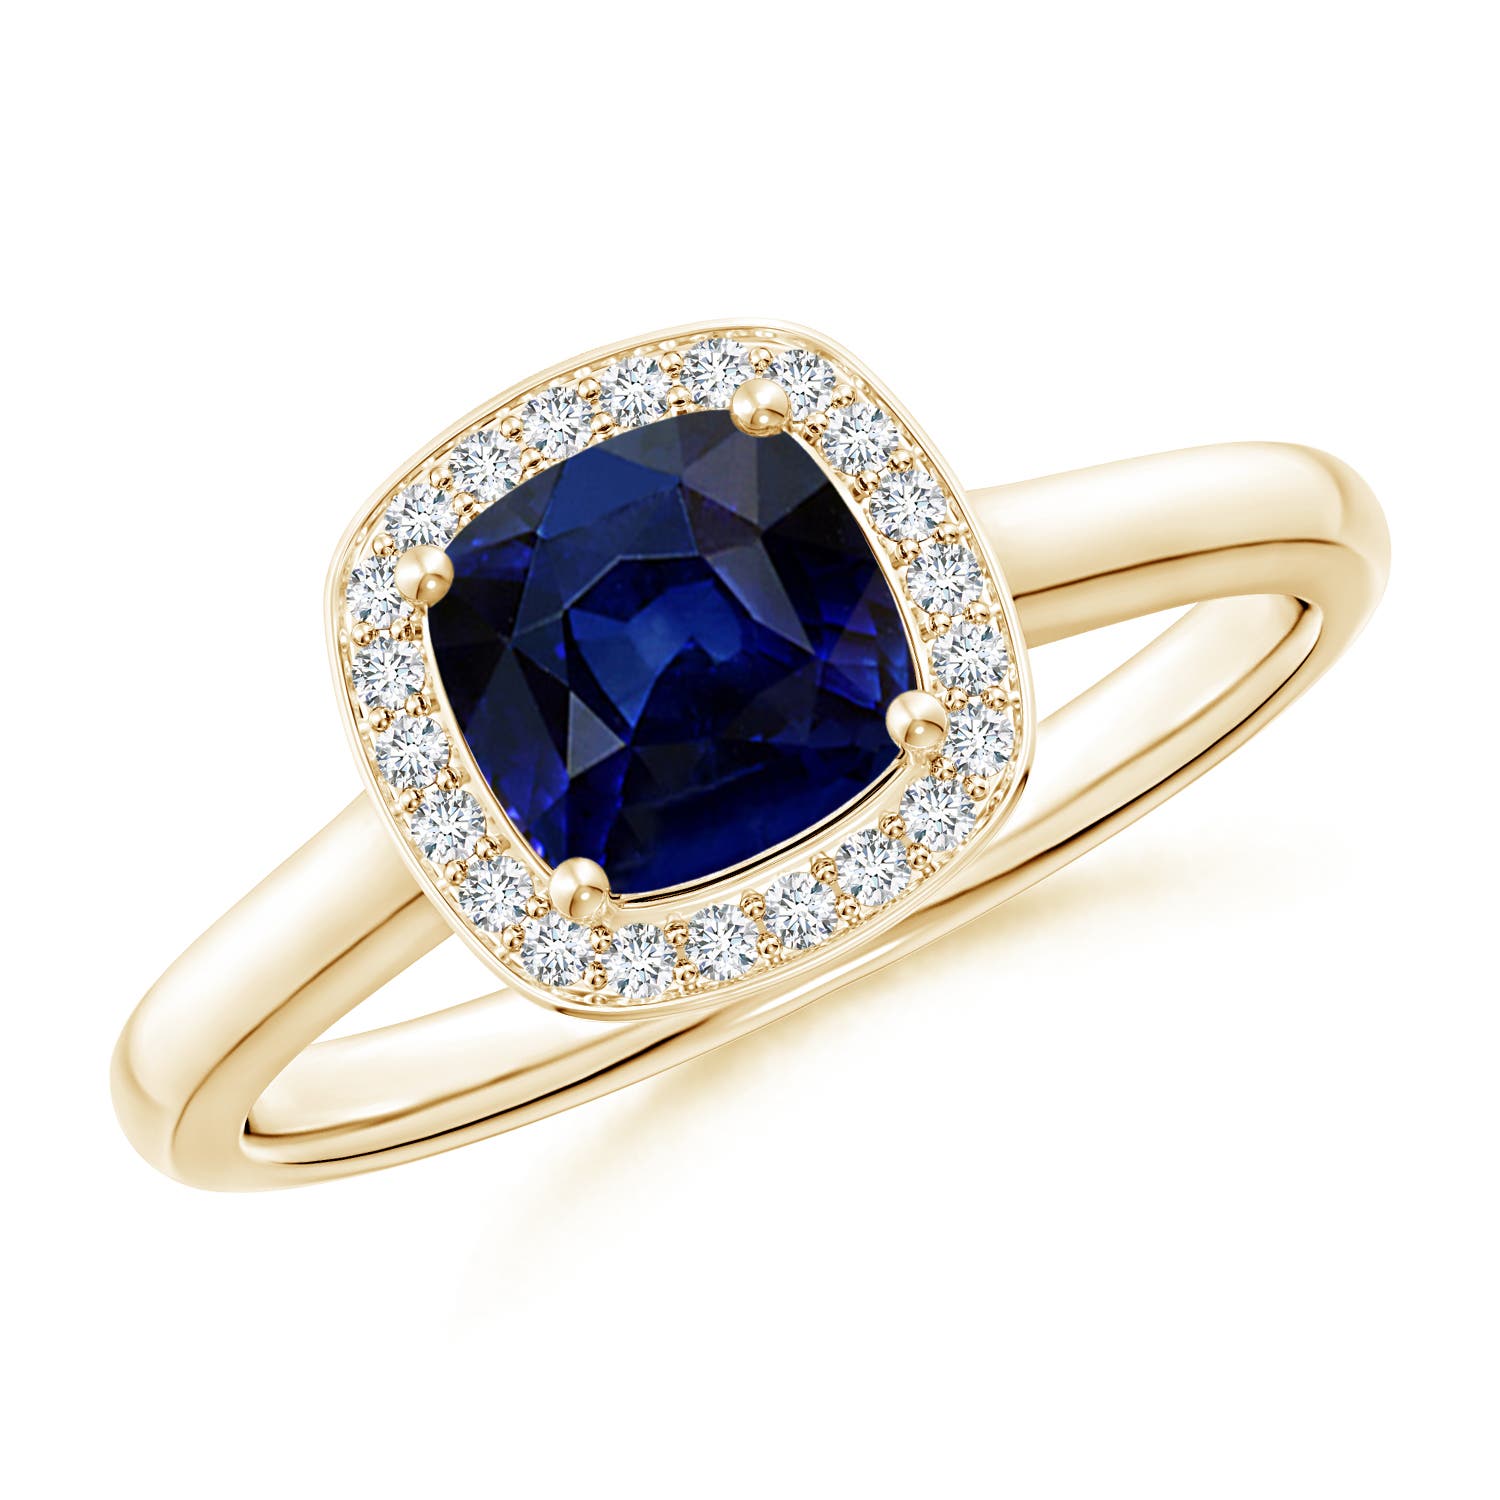 AAA - Blue Sapphire / 0.68 CT / 14 KT Yellow Gold